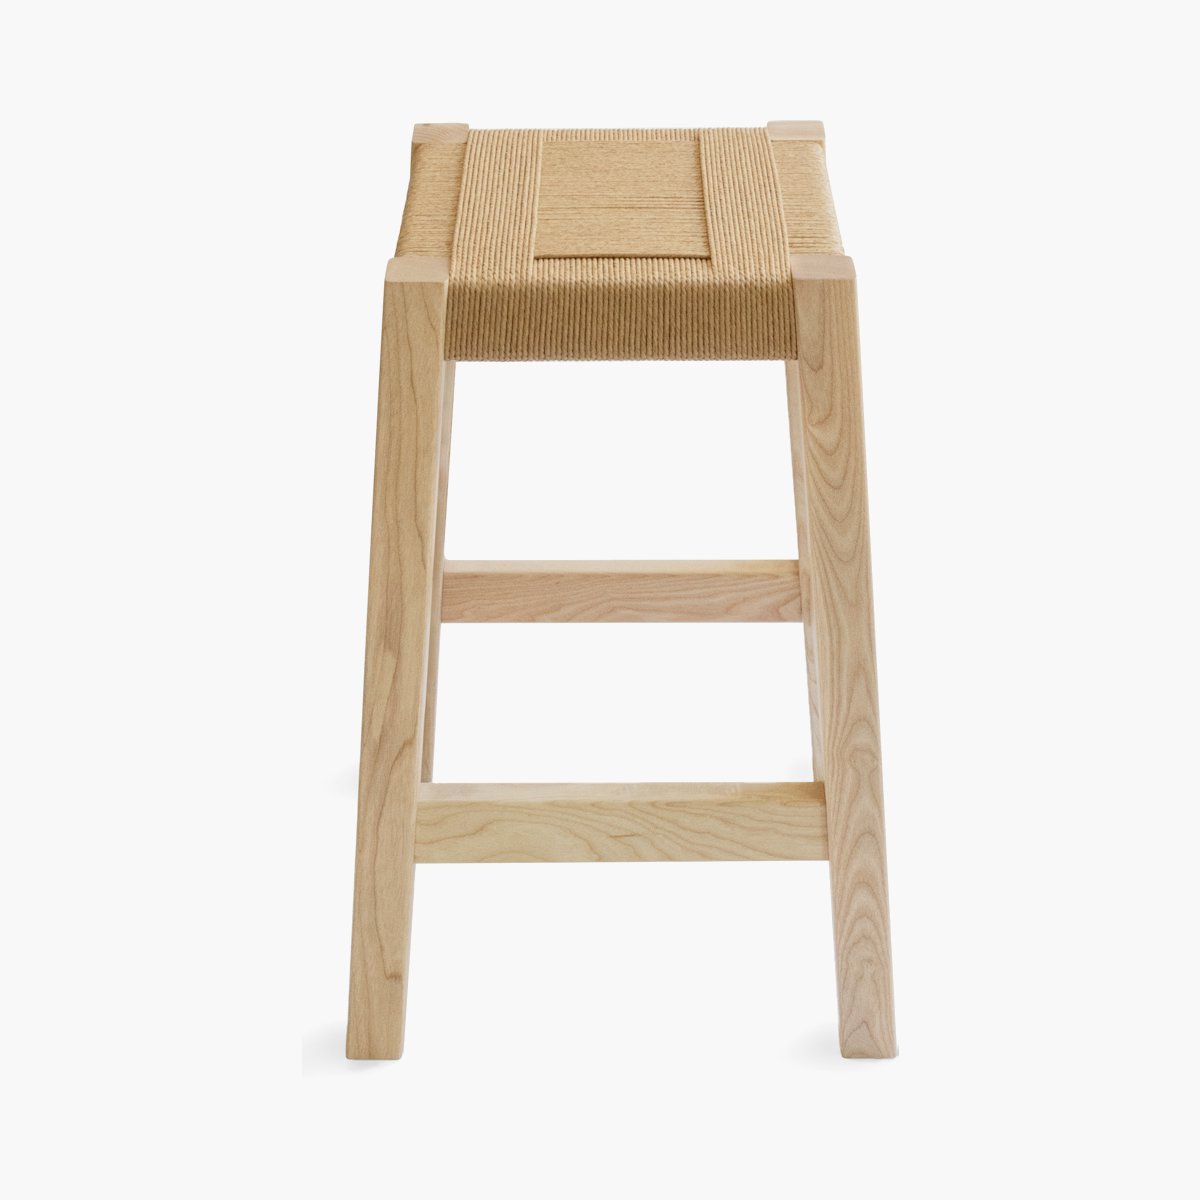 The Weaver's Stool, Counter Height